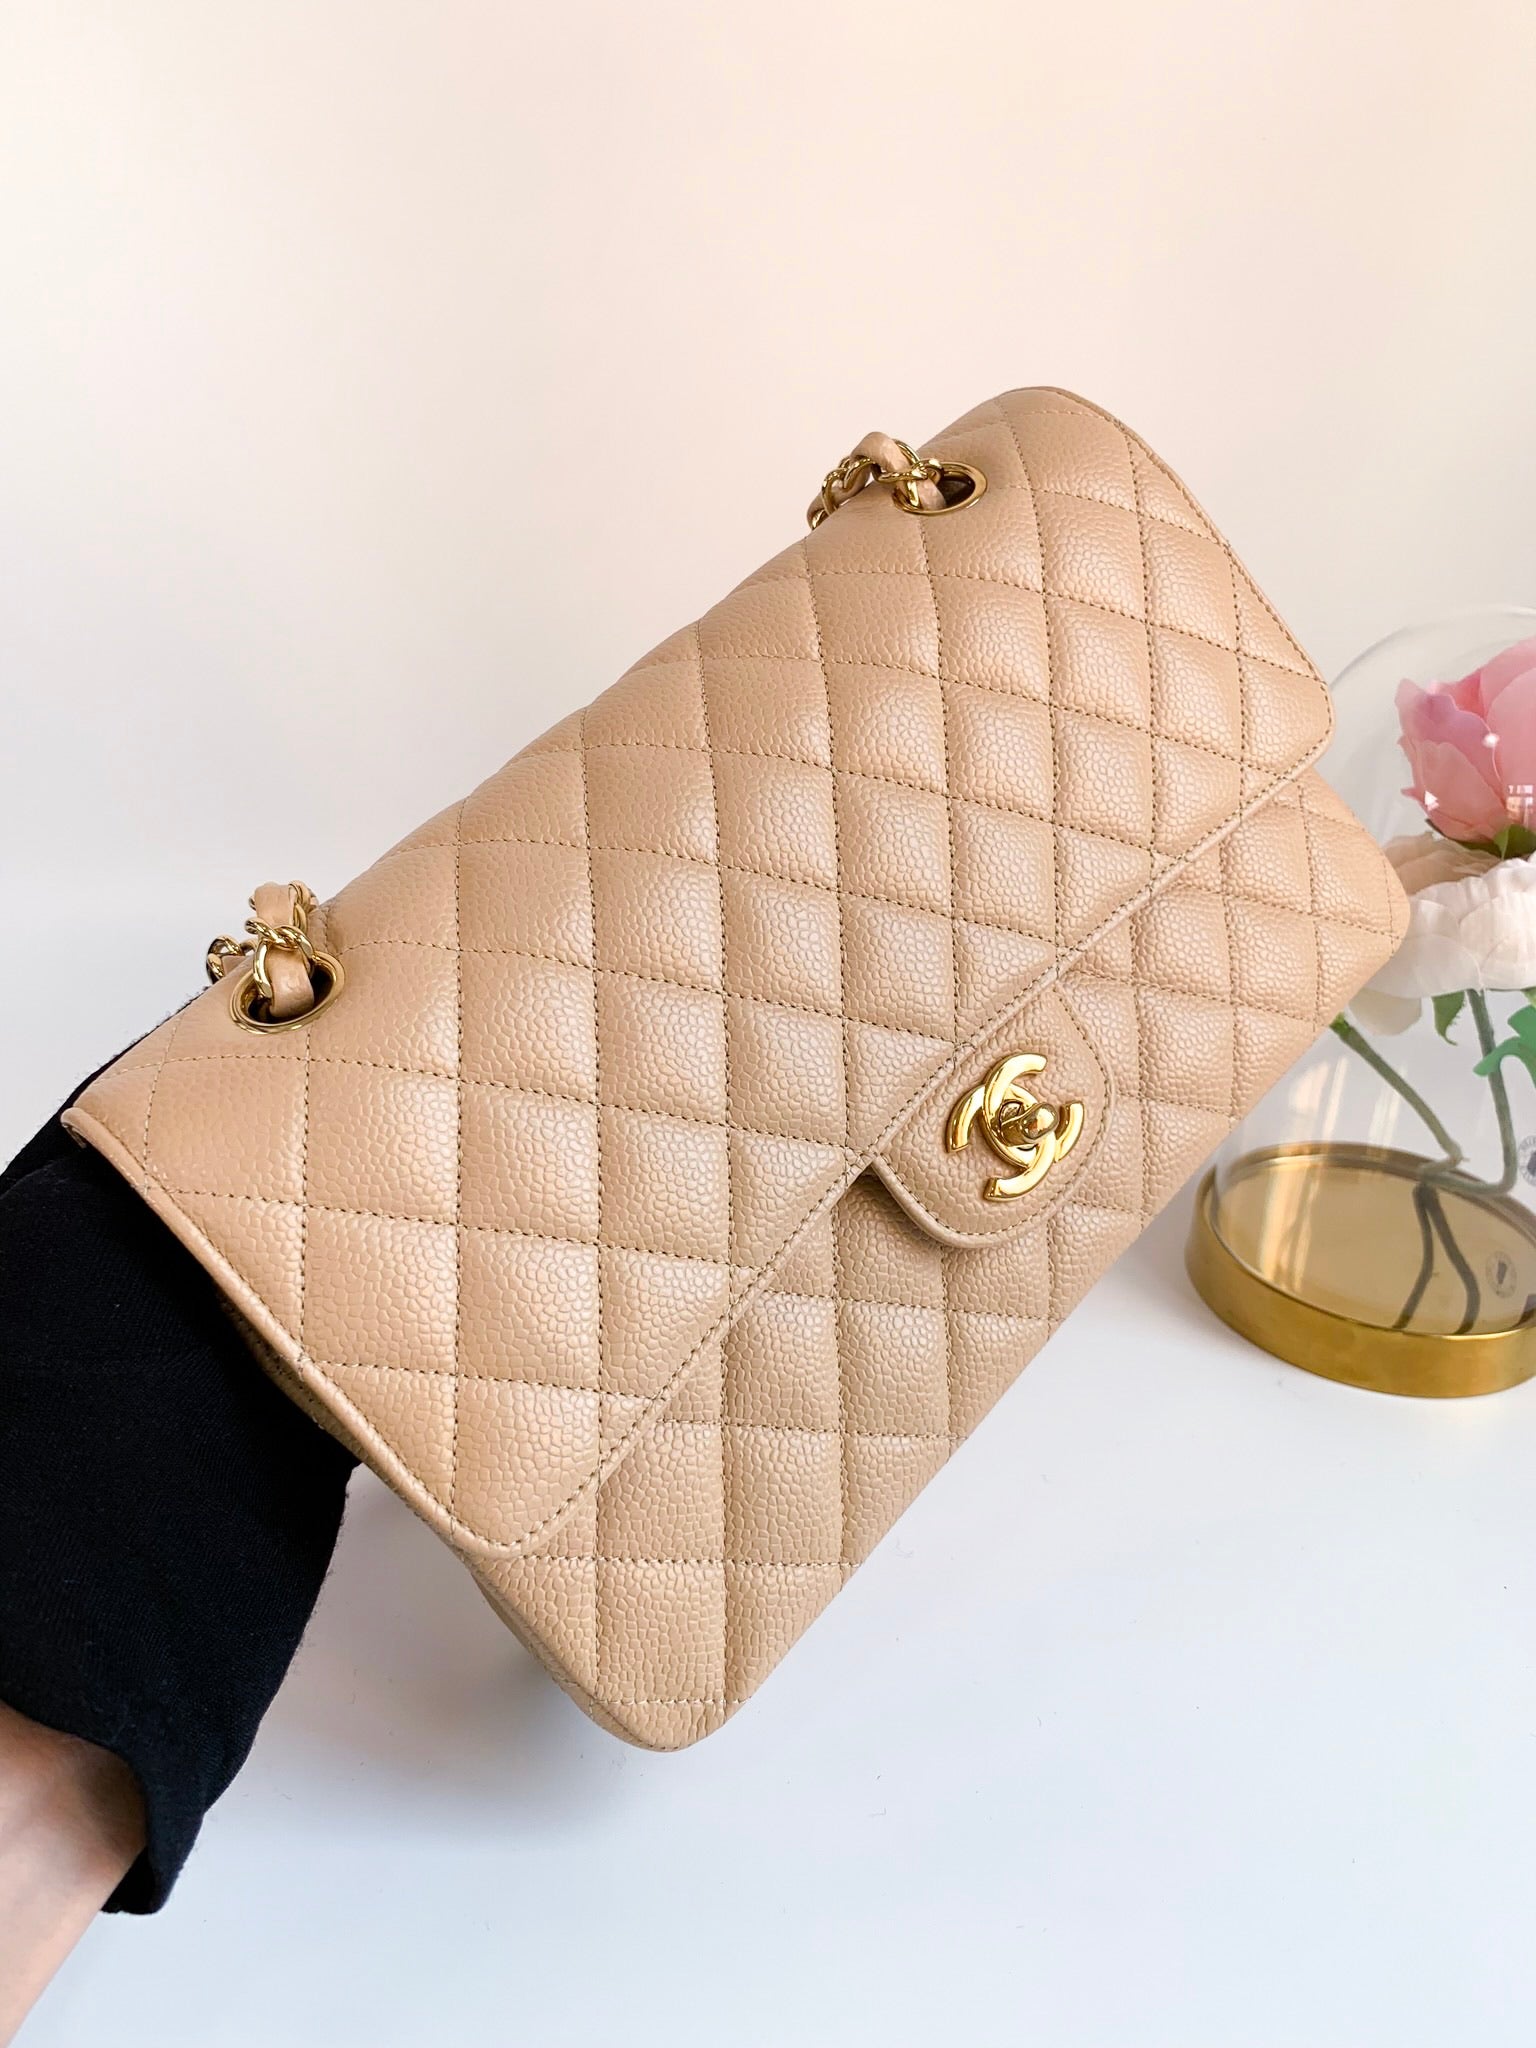 Caviar Quilted Medium Double Flap Beige